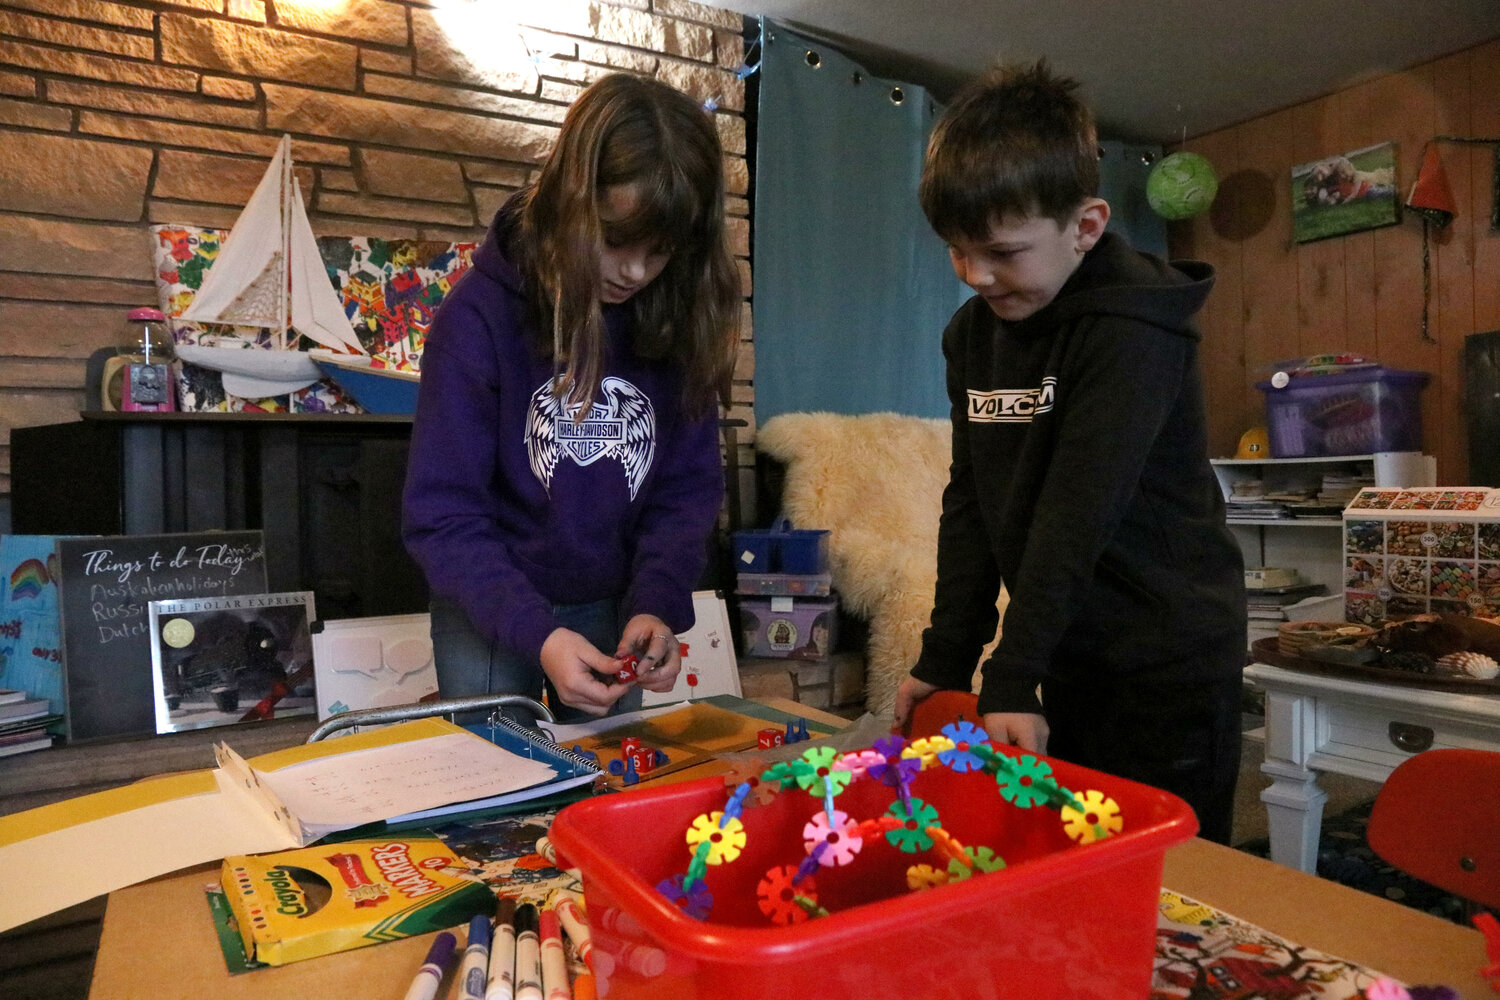 Lyla, 10, works on an algebra problem while Camden, 7, looks on at Sweet Tomatoes Learning Center in Chehalis on Wednesday, Dec. 6.